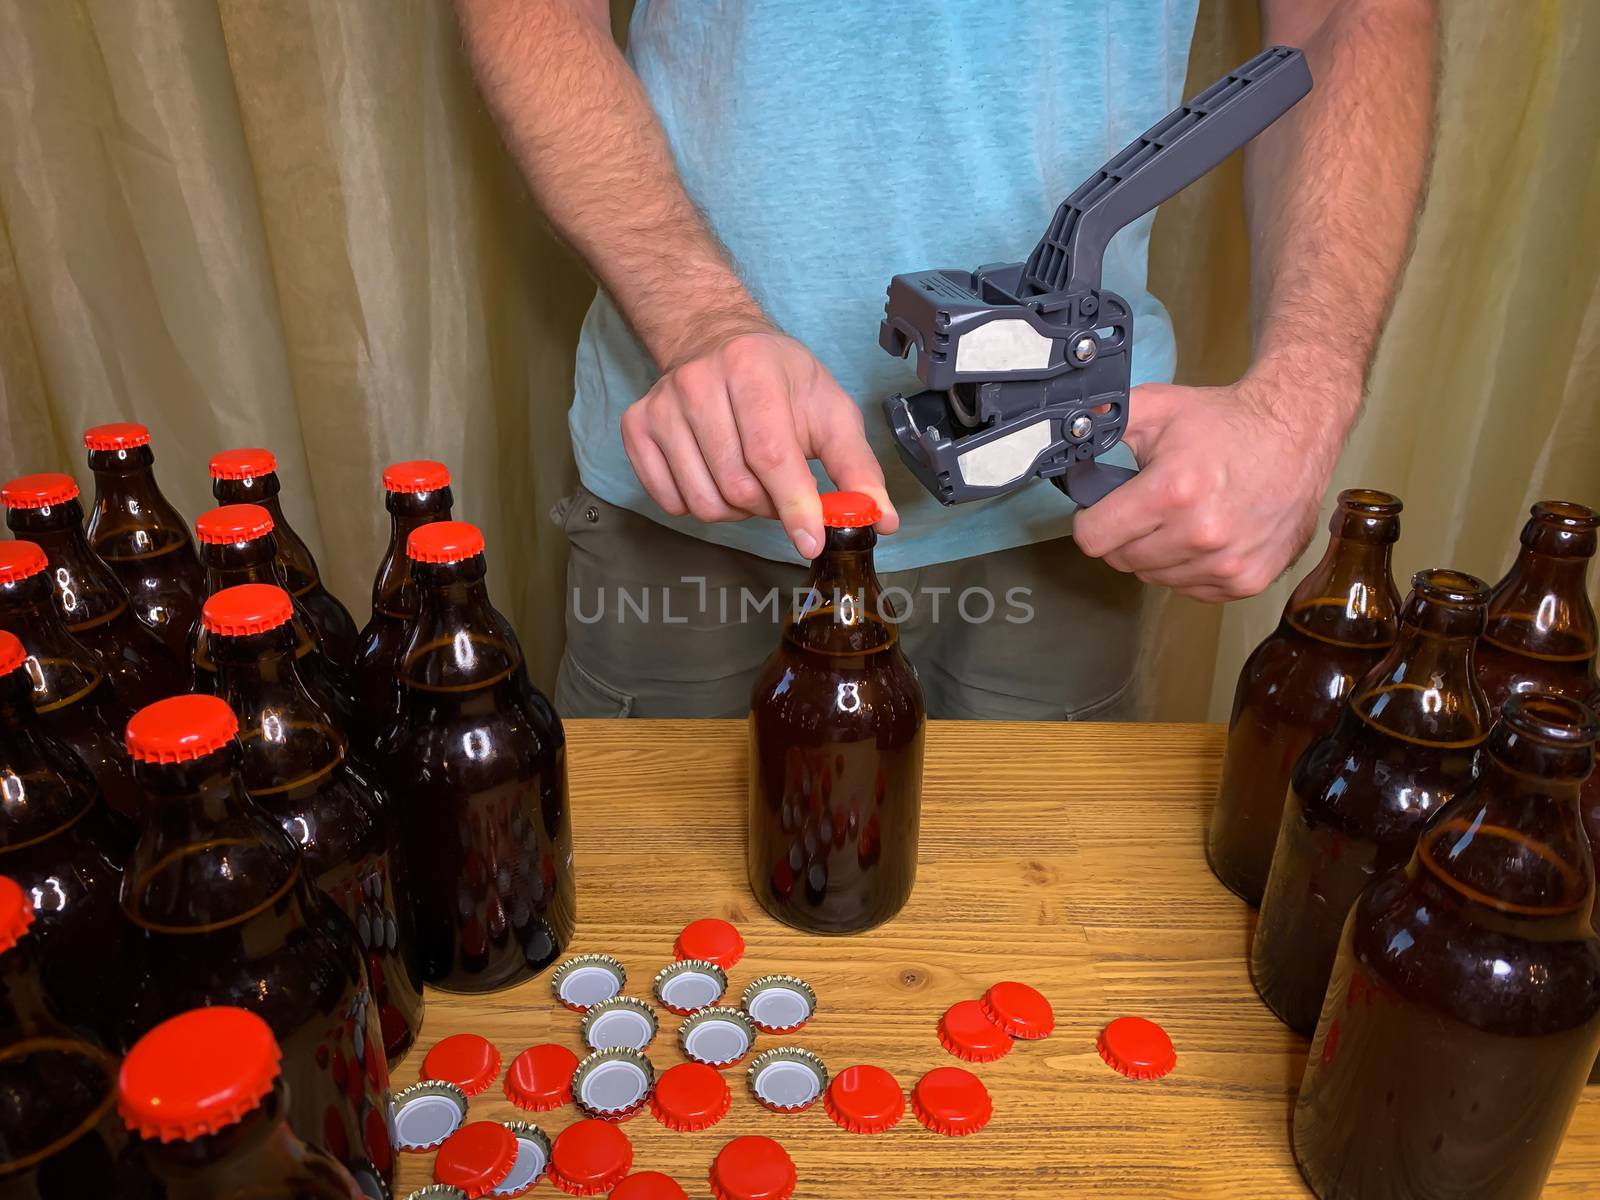 Craft beer brewing at home, man closes brown glass beer bottles with plastic capper on wooden table with red crown caps. Horizontal stock image